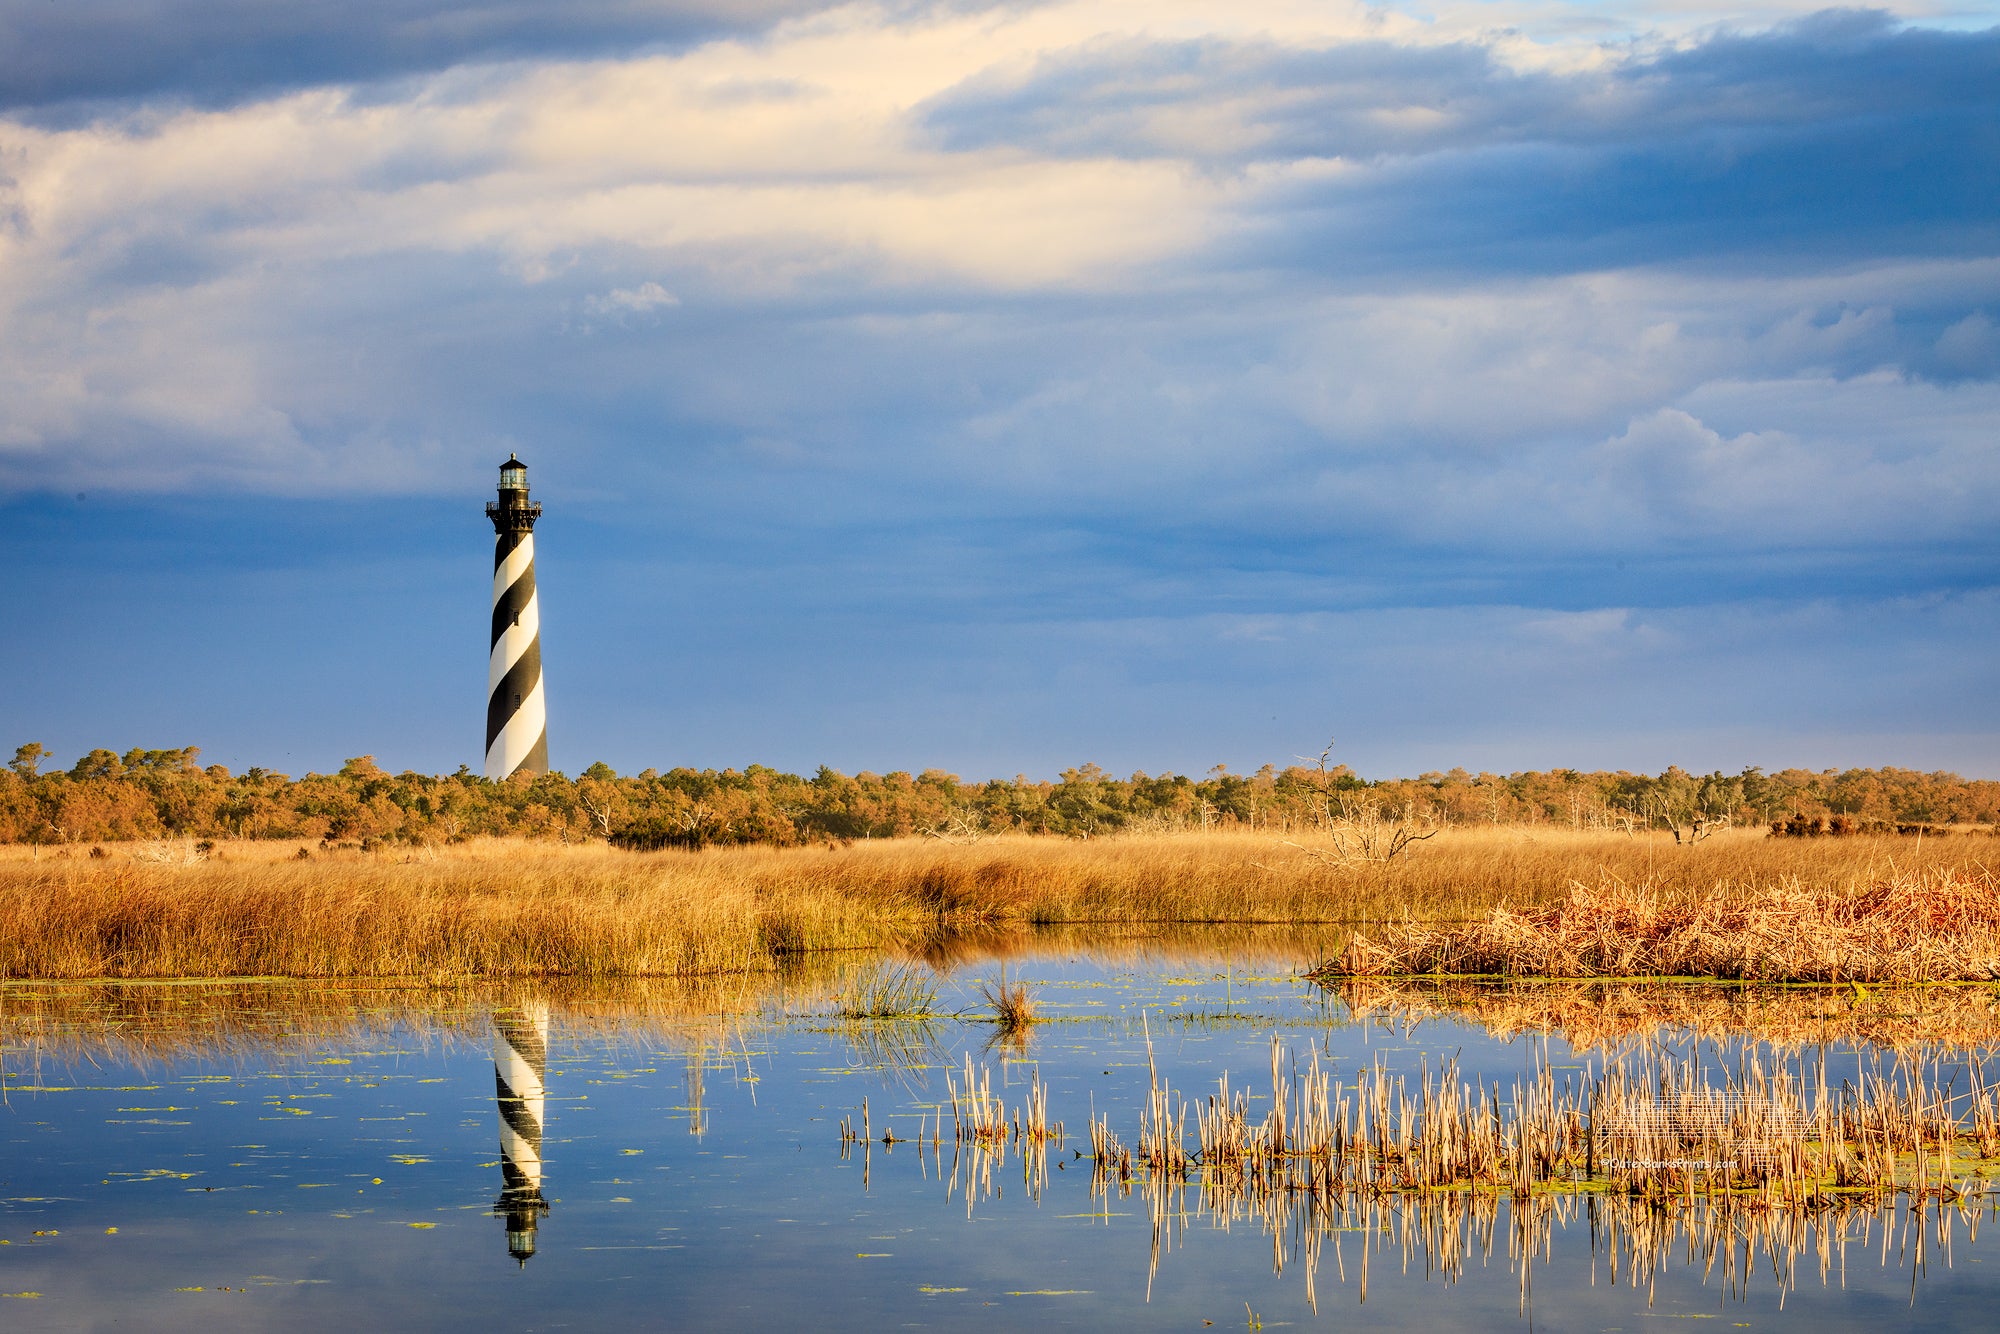 Cape Hatteras lighthouse reflected in the wild marshy landscape on the Outer Banks of NC.